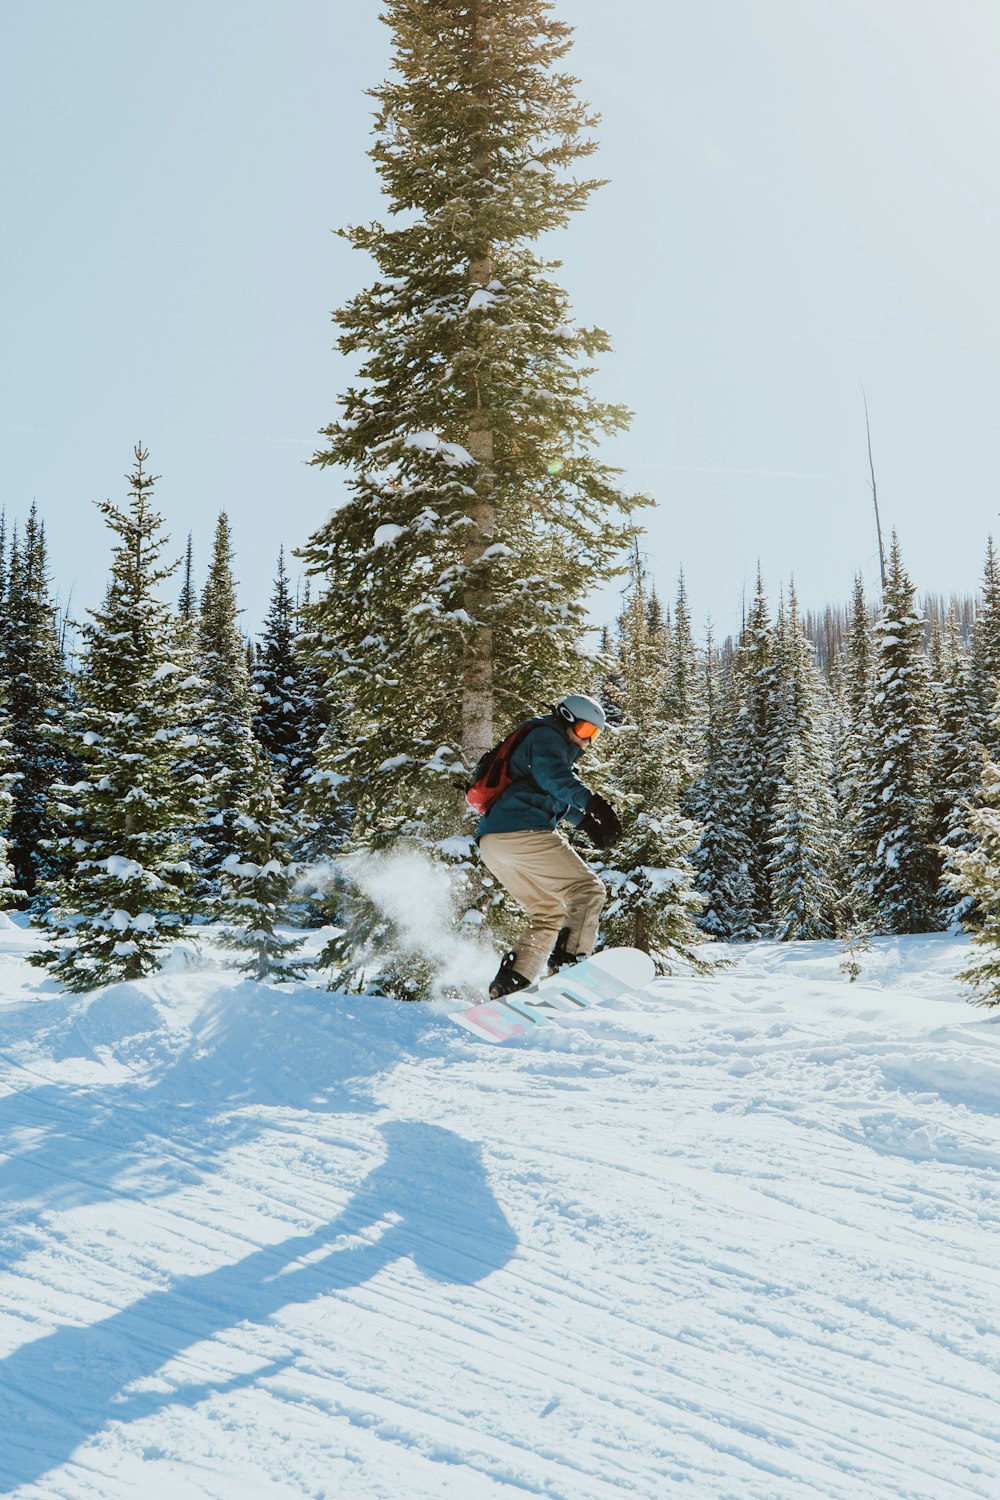 man in black jacket and brown pants riding on snowboard on snow covered ground during daytime